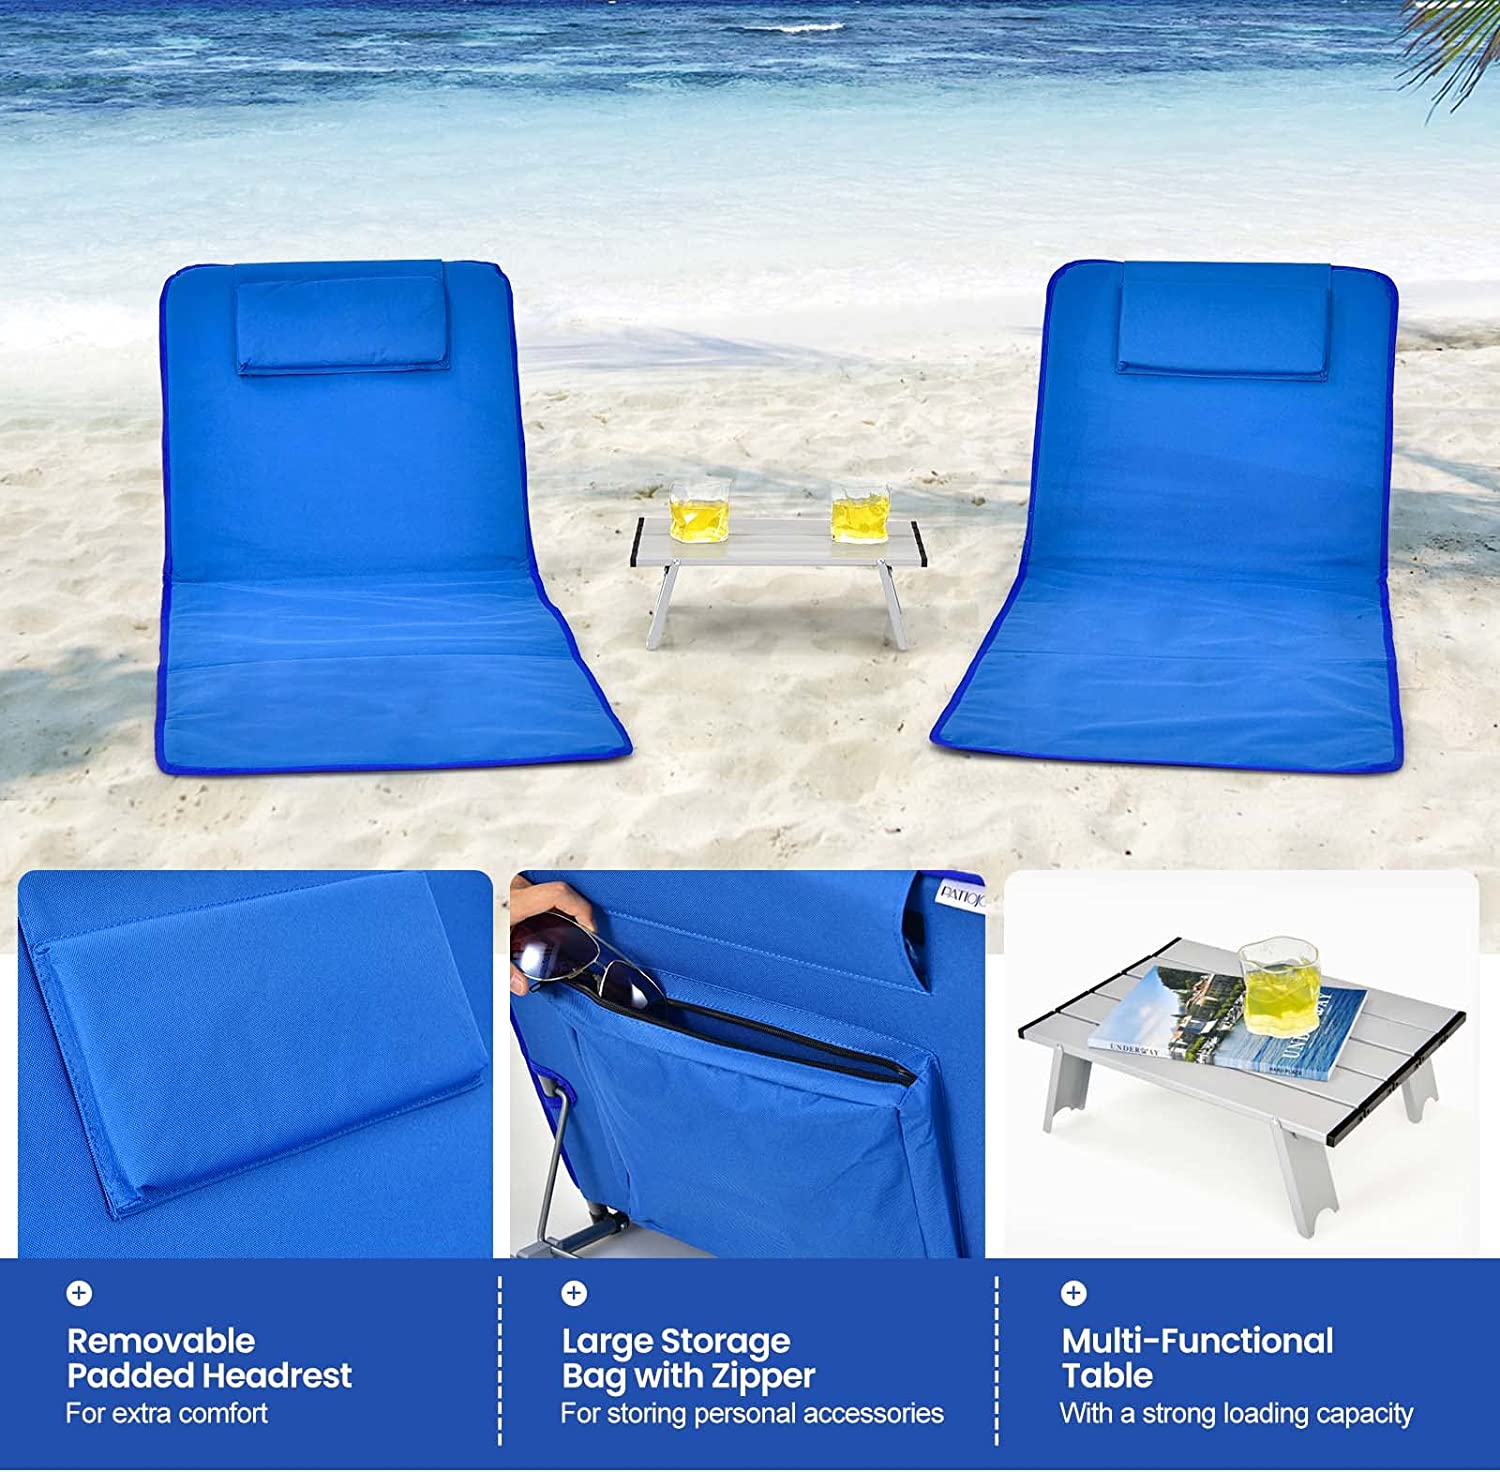 Beach Chairs for Adults with Side Table, Folding Lounge Chairs, 5 Position Adjustable Lawn Chair for Sunbathing, Camping, 2-Pack Set - image 4 of 9